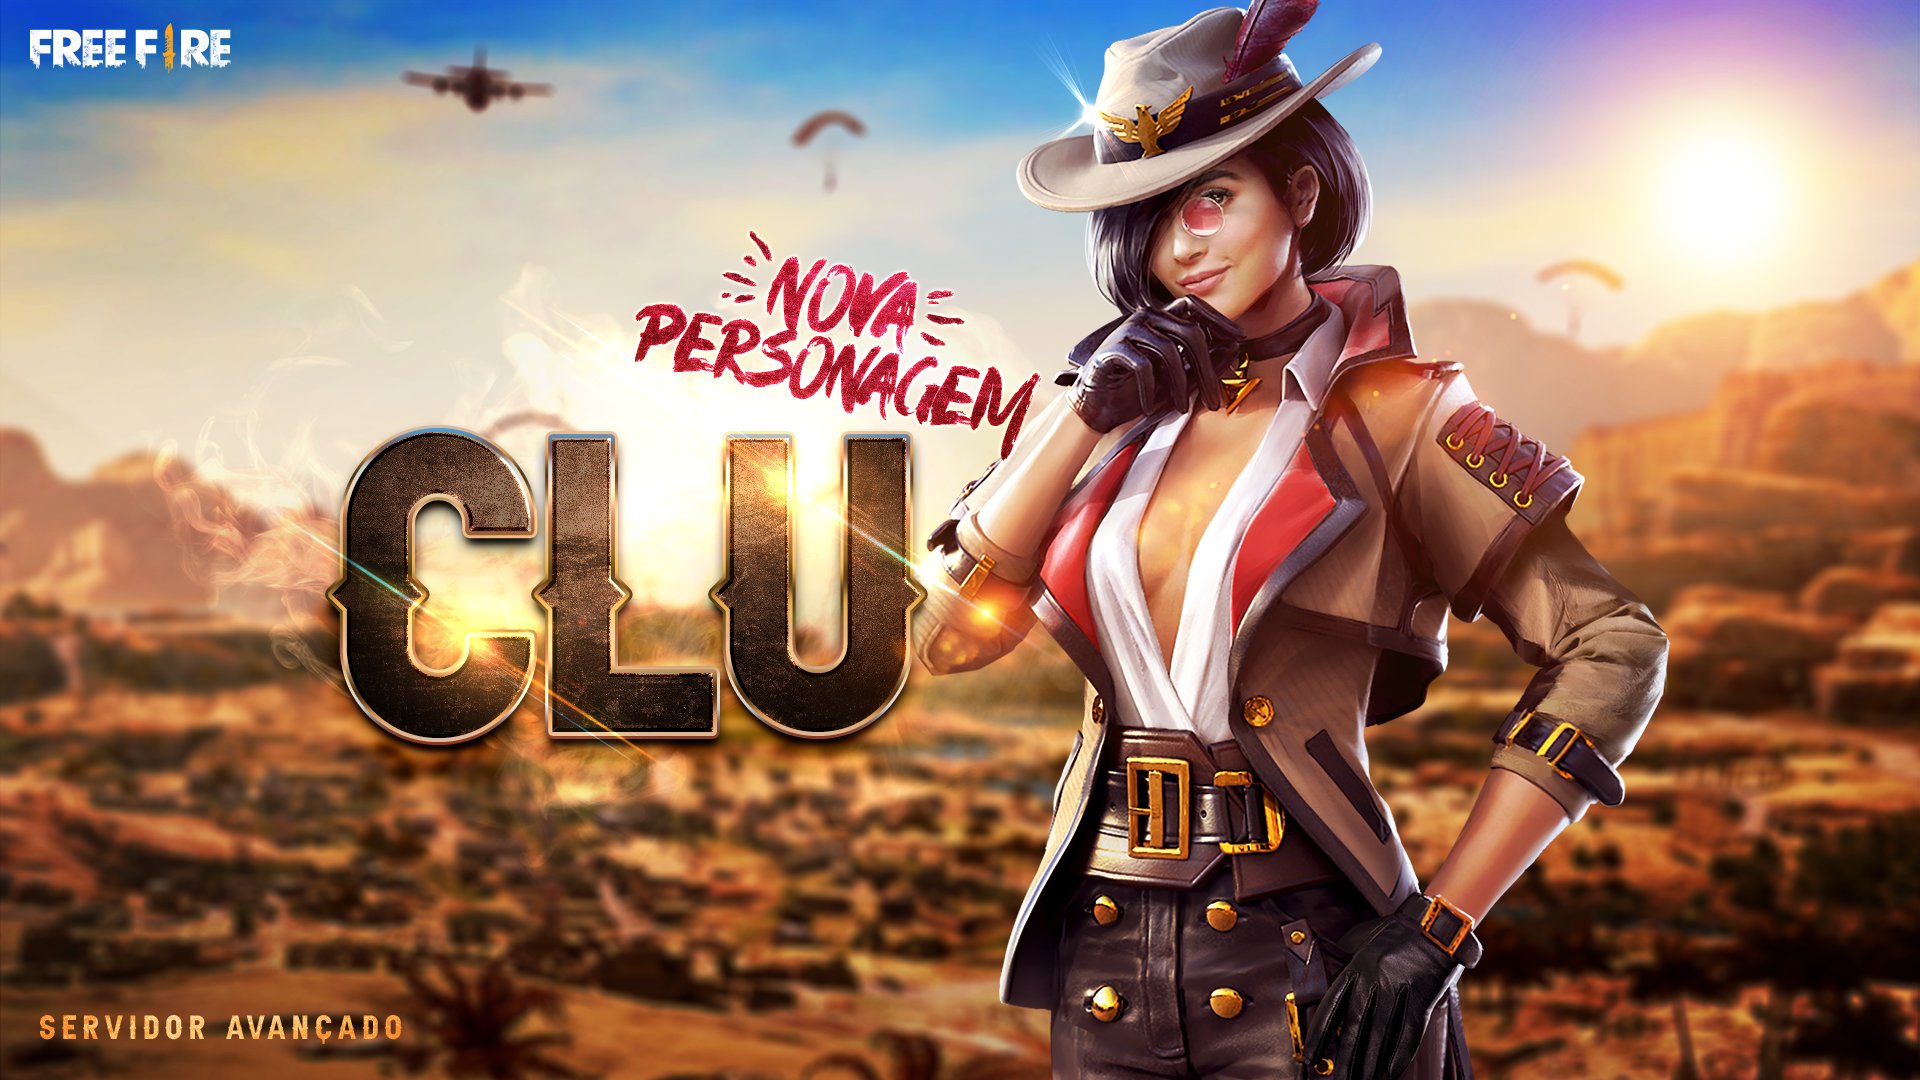 Free Fire New Female Character Named Clu Is Free Fire S New Character